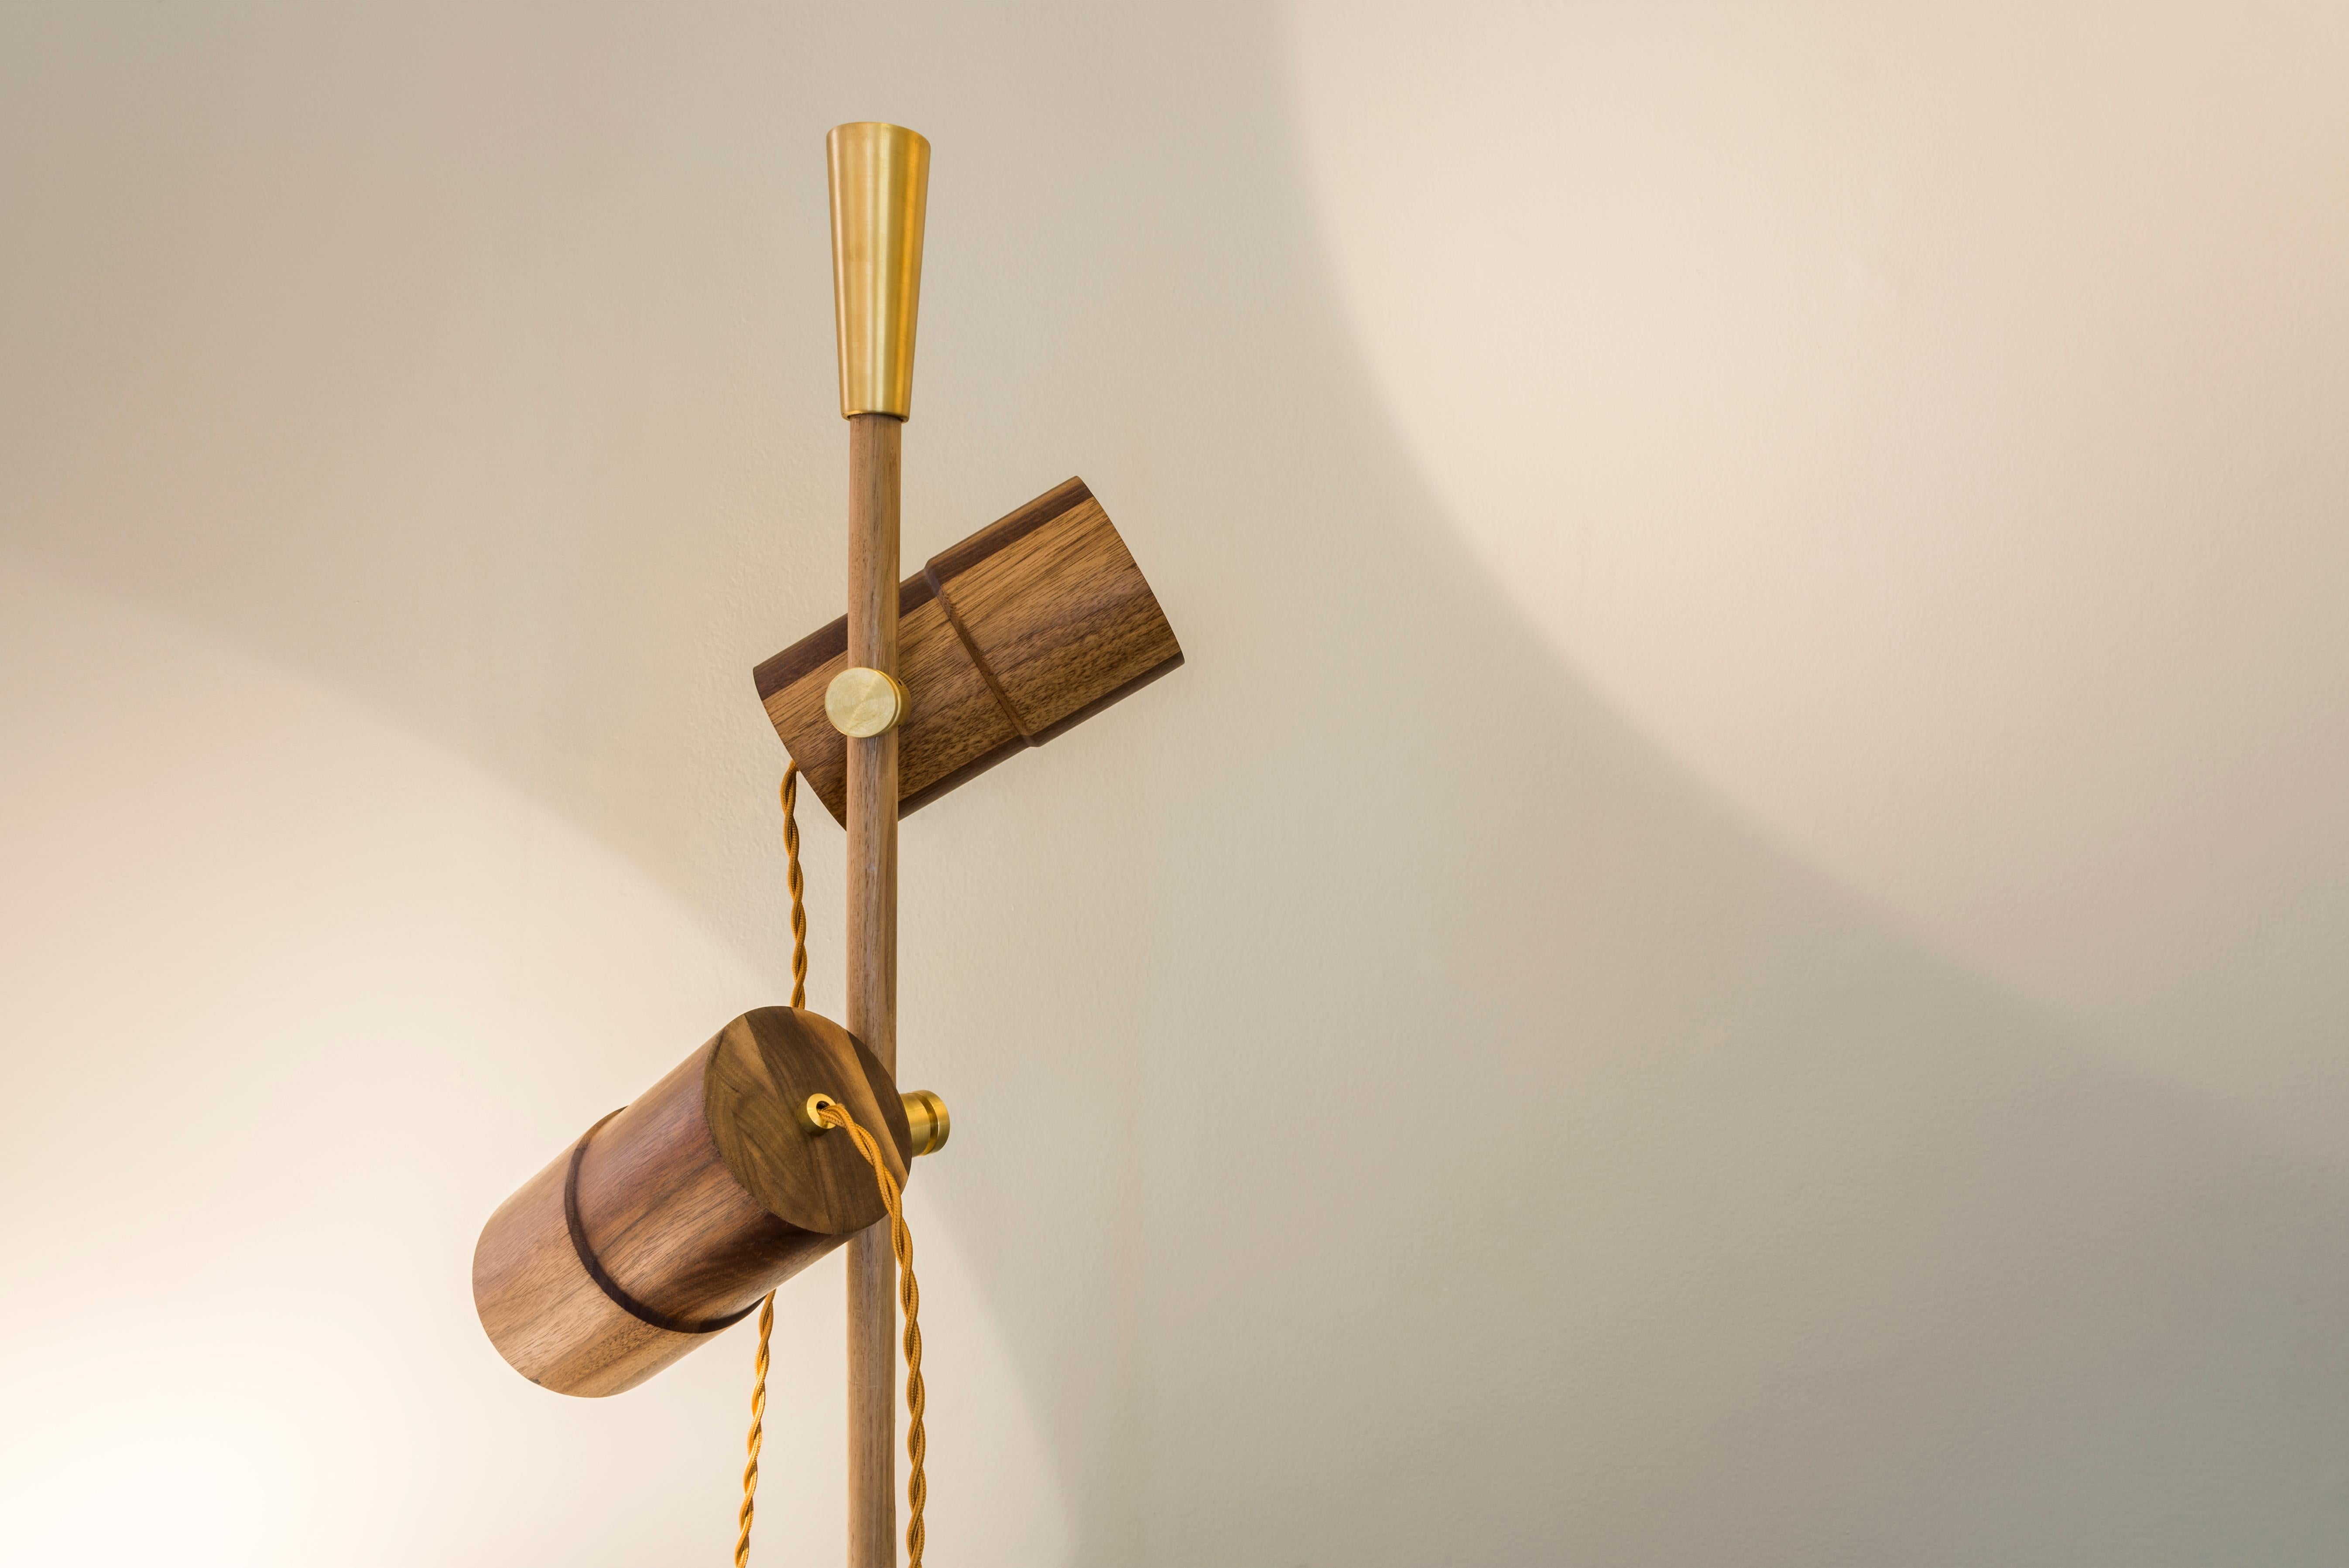 Felina floor lamp are inspired by the simplicity of basic geometric forms, allowing materials - mainly machined solid brass and walnut - to express their inherent qualities. Each piece is designed to be a gleam of light that elegantly shines while